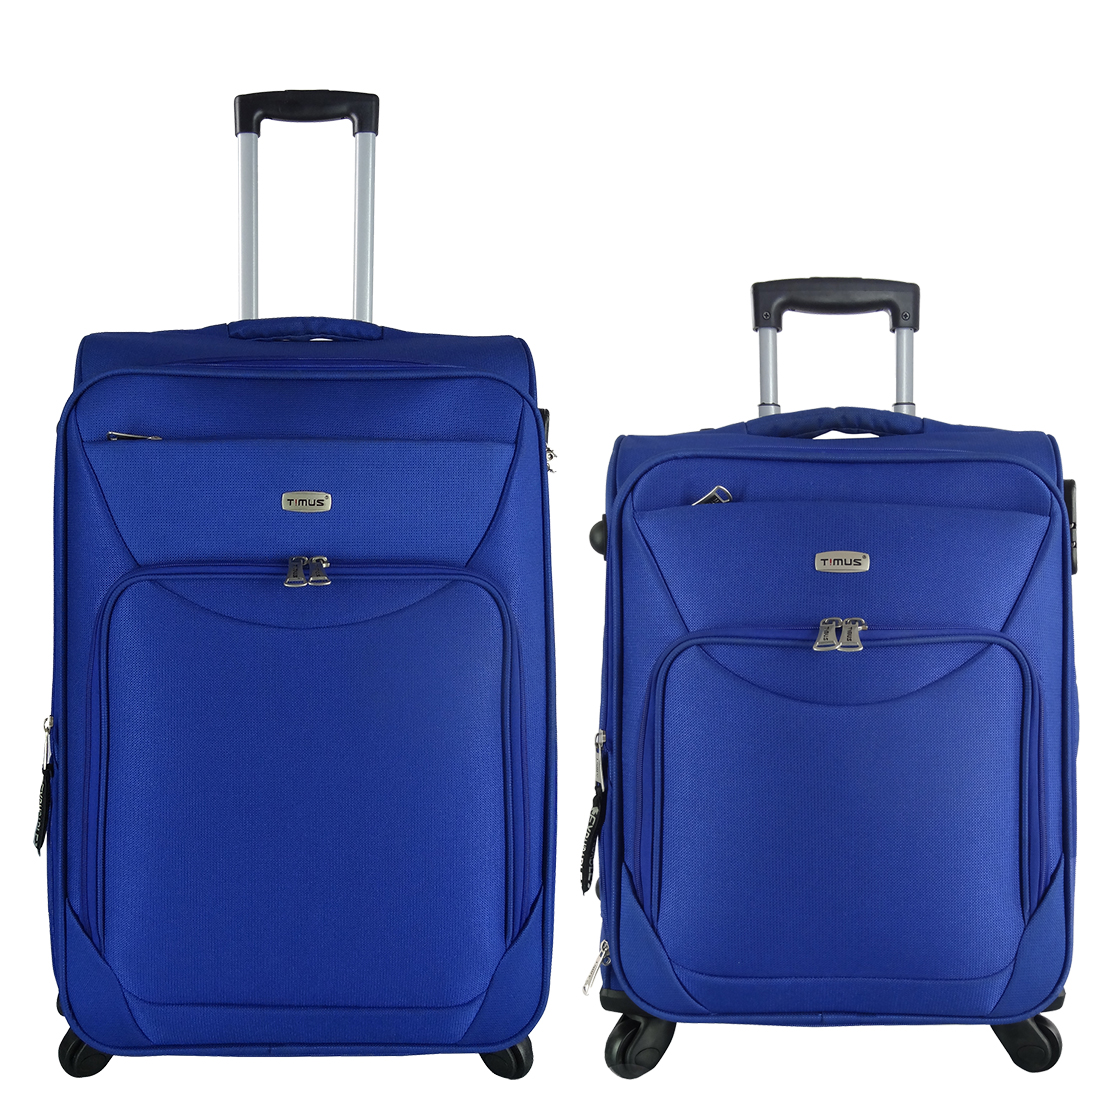 Timus Upbeat Spinner Blue 55 65 Cm 4 WheelTrolleySuitcase Expandable Cabin And Check In Luggage 24 Inch  Blue 